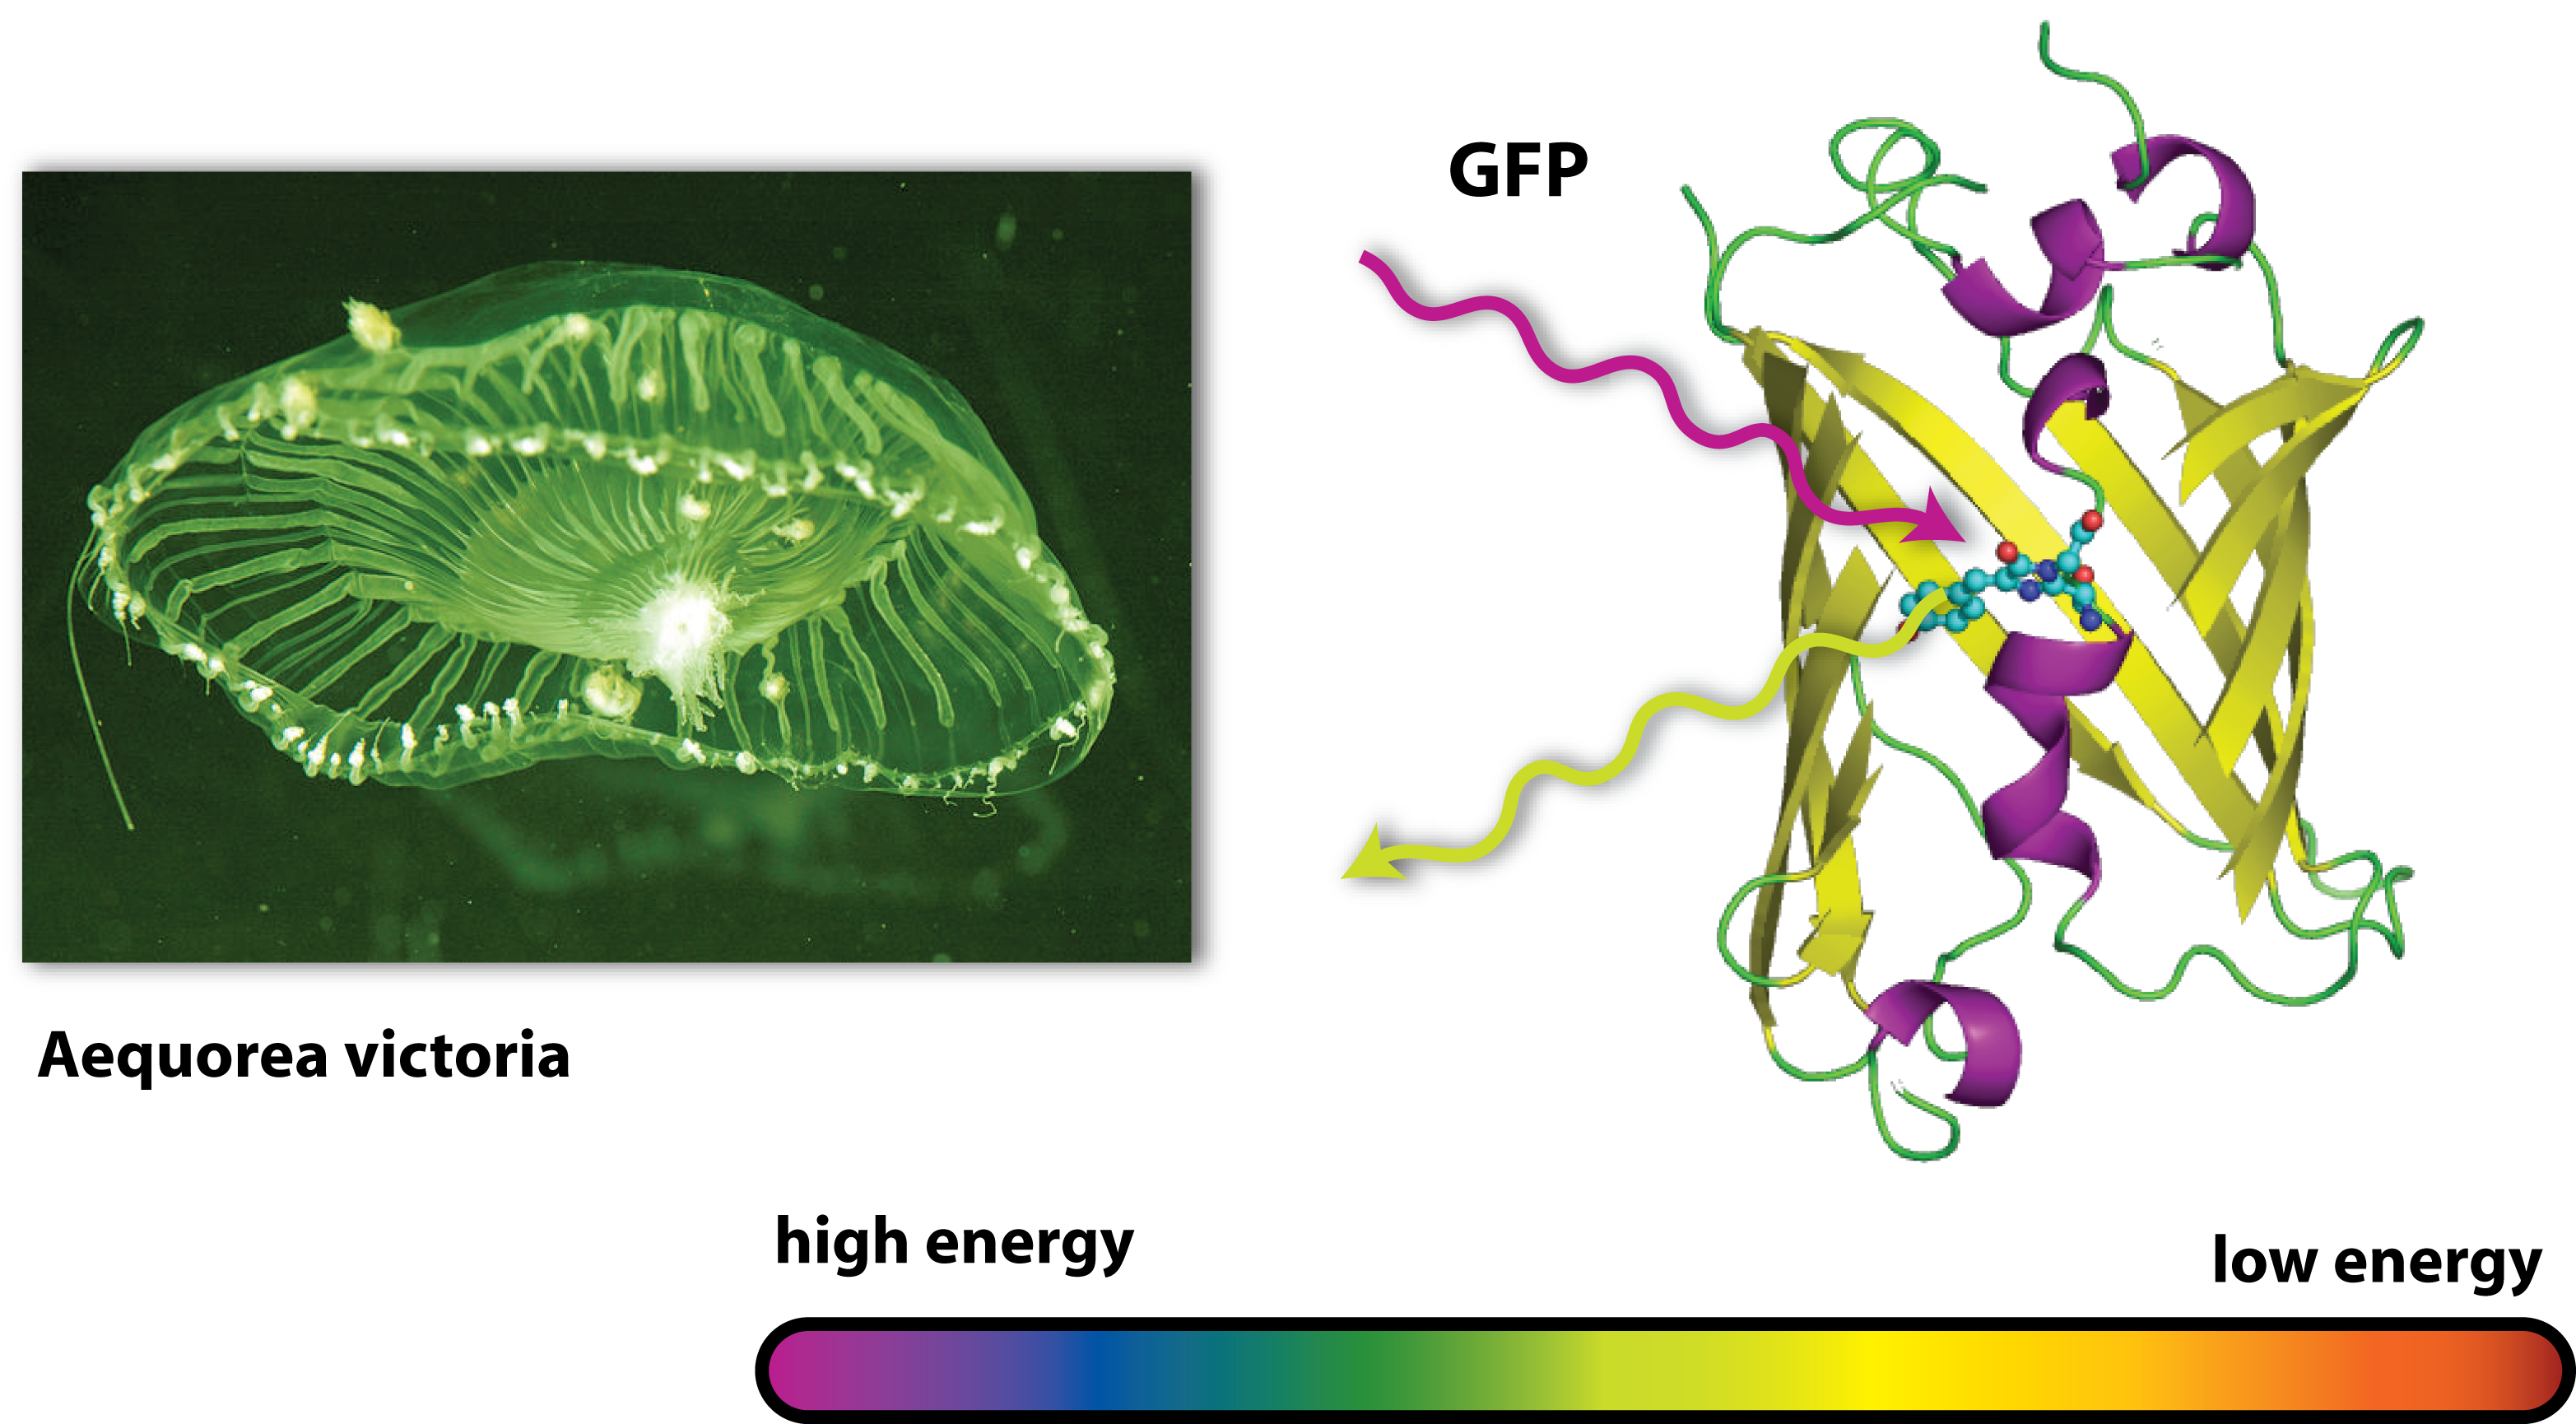 Gfp phips.png